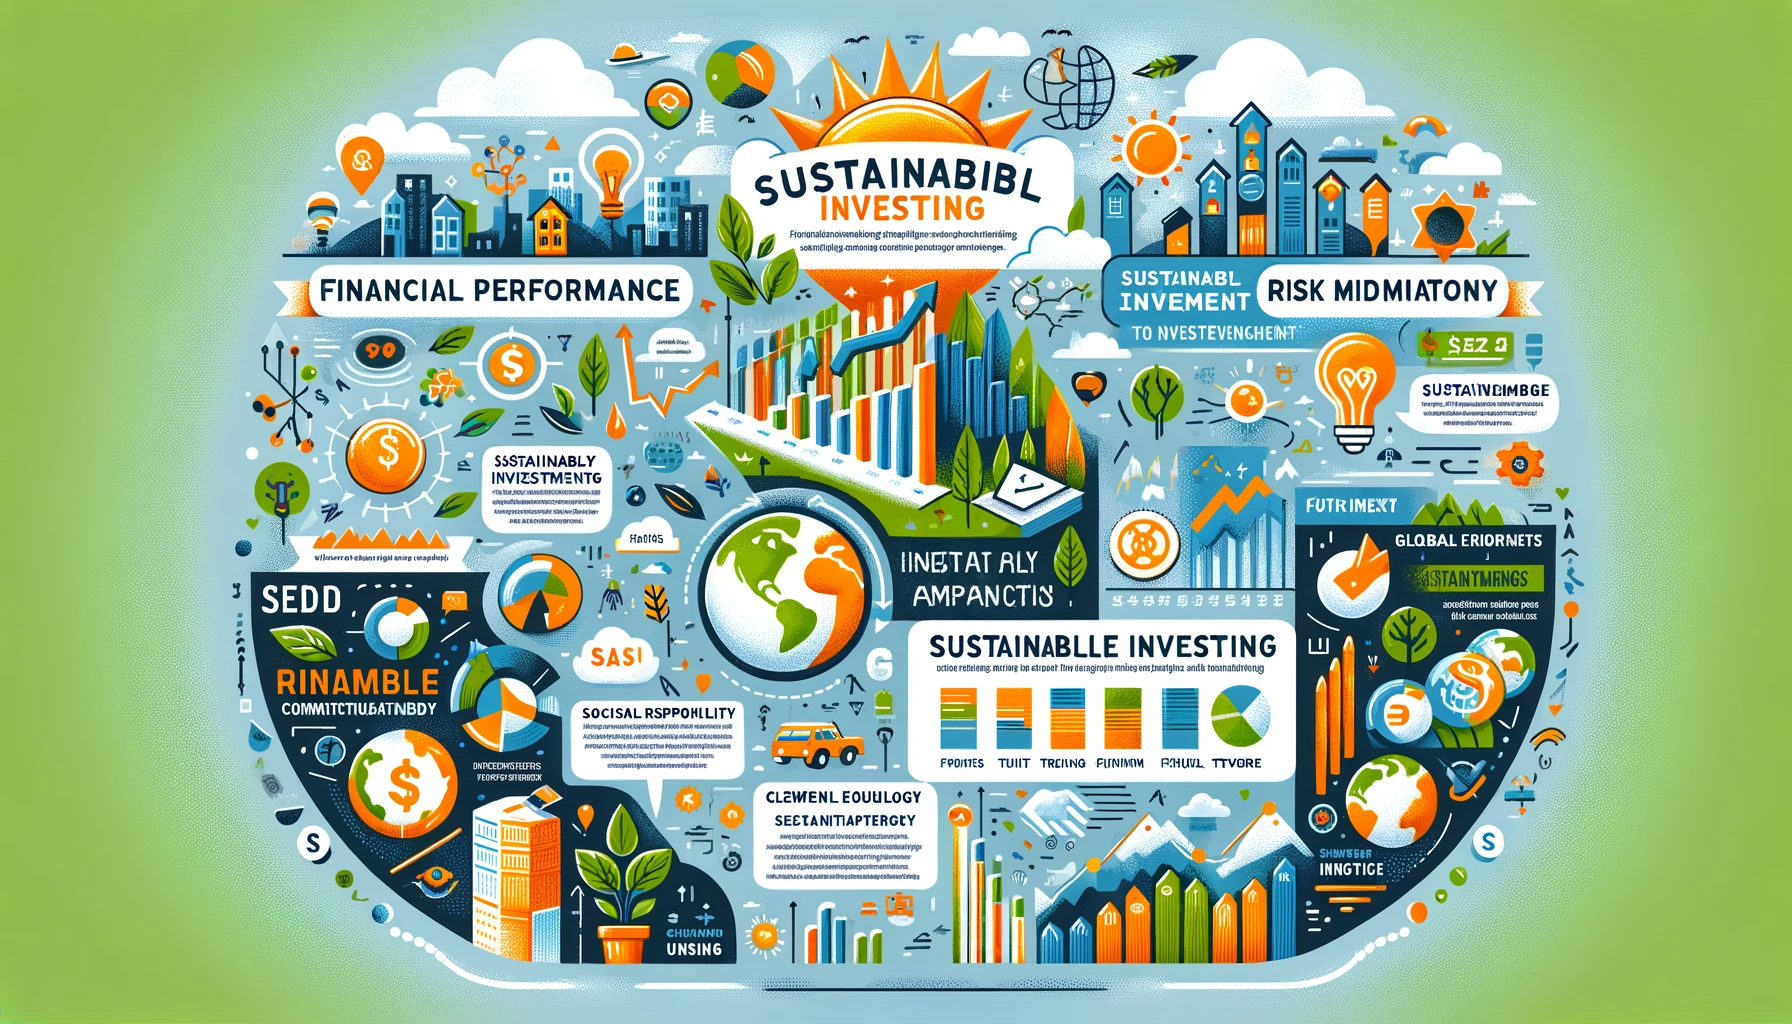 An Infographic on Invest in Sustainable Companies